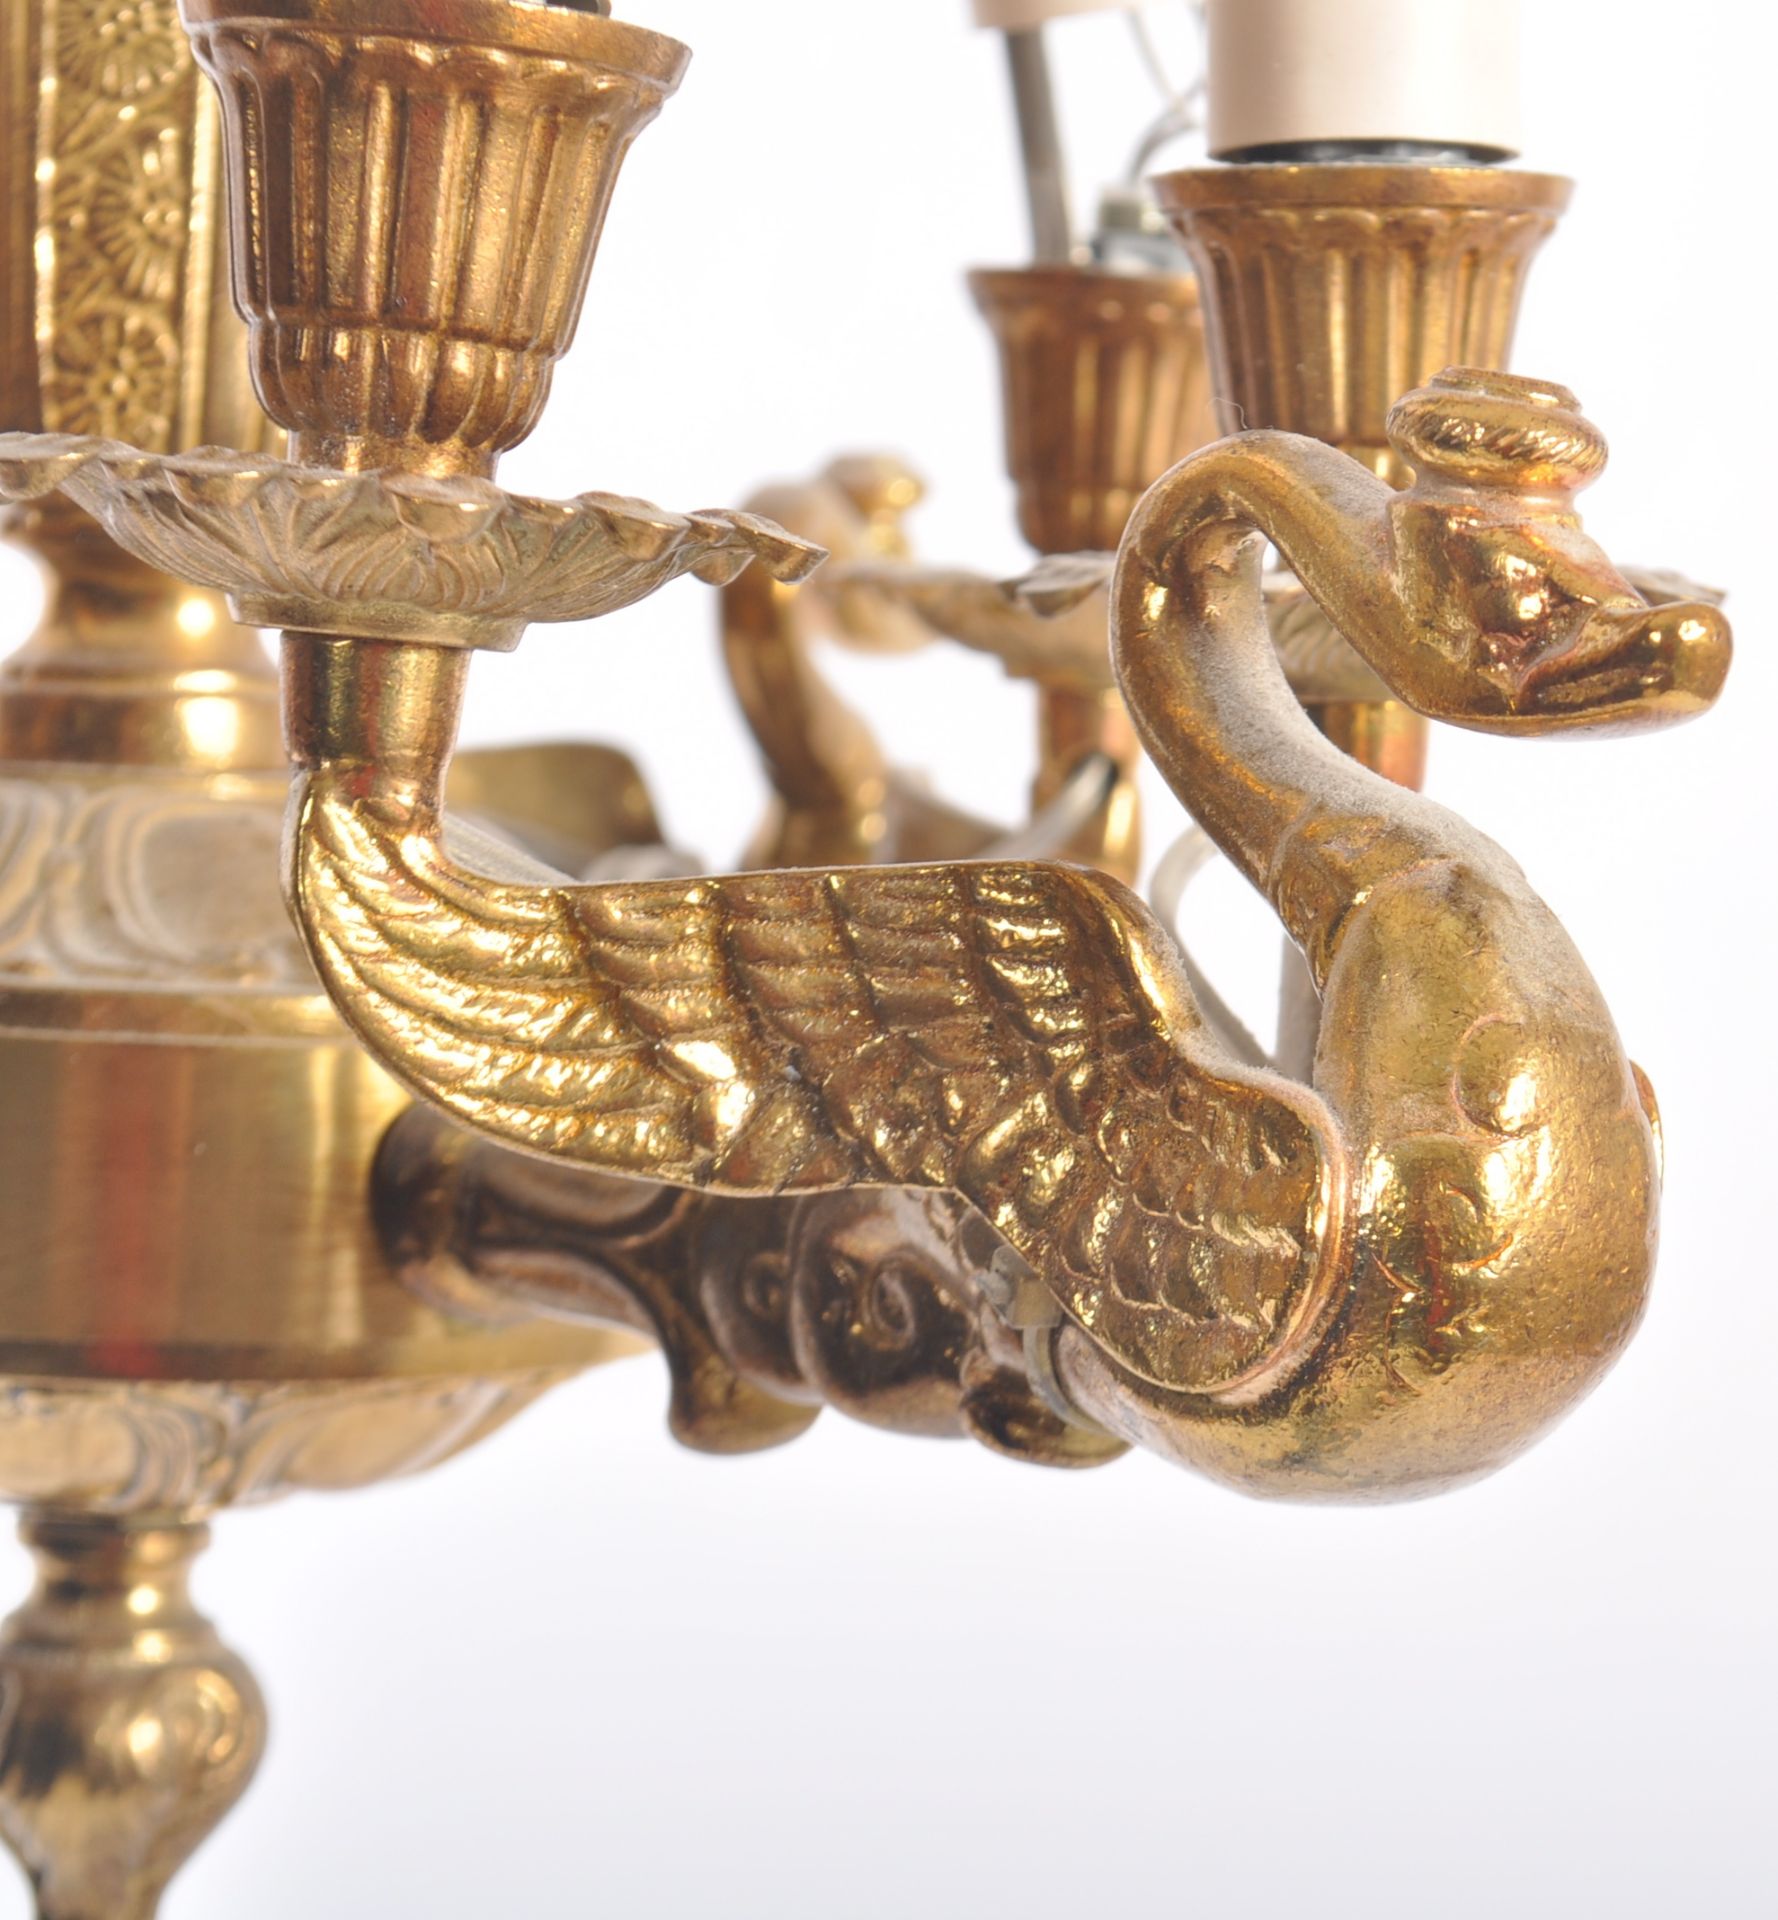 SUITE OF ANTIQUE REVIVAL GILT METAL LIGHTING - Image 3 of 13